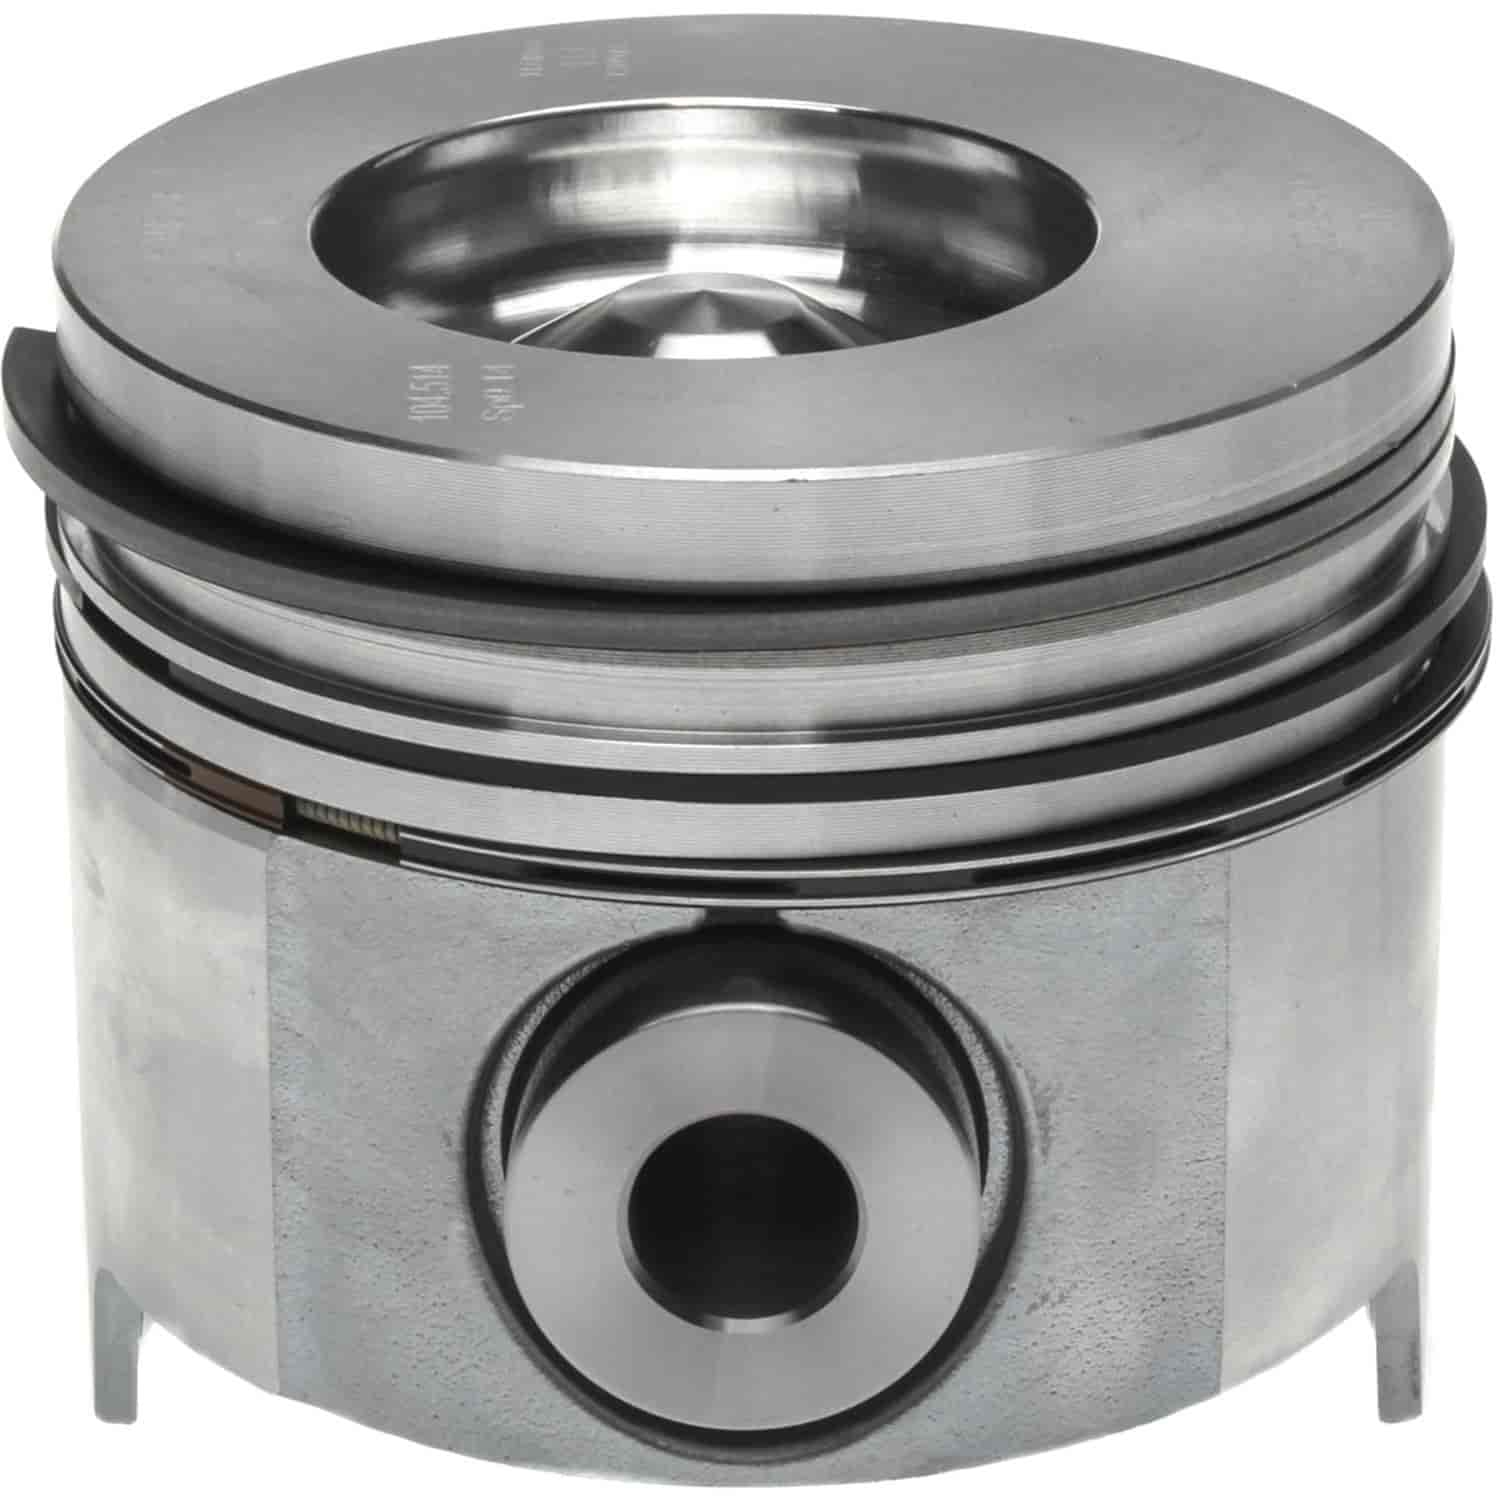 Piston and Rings Set 2001-2005 Chevy/GMC Duramax Diesel